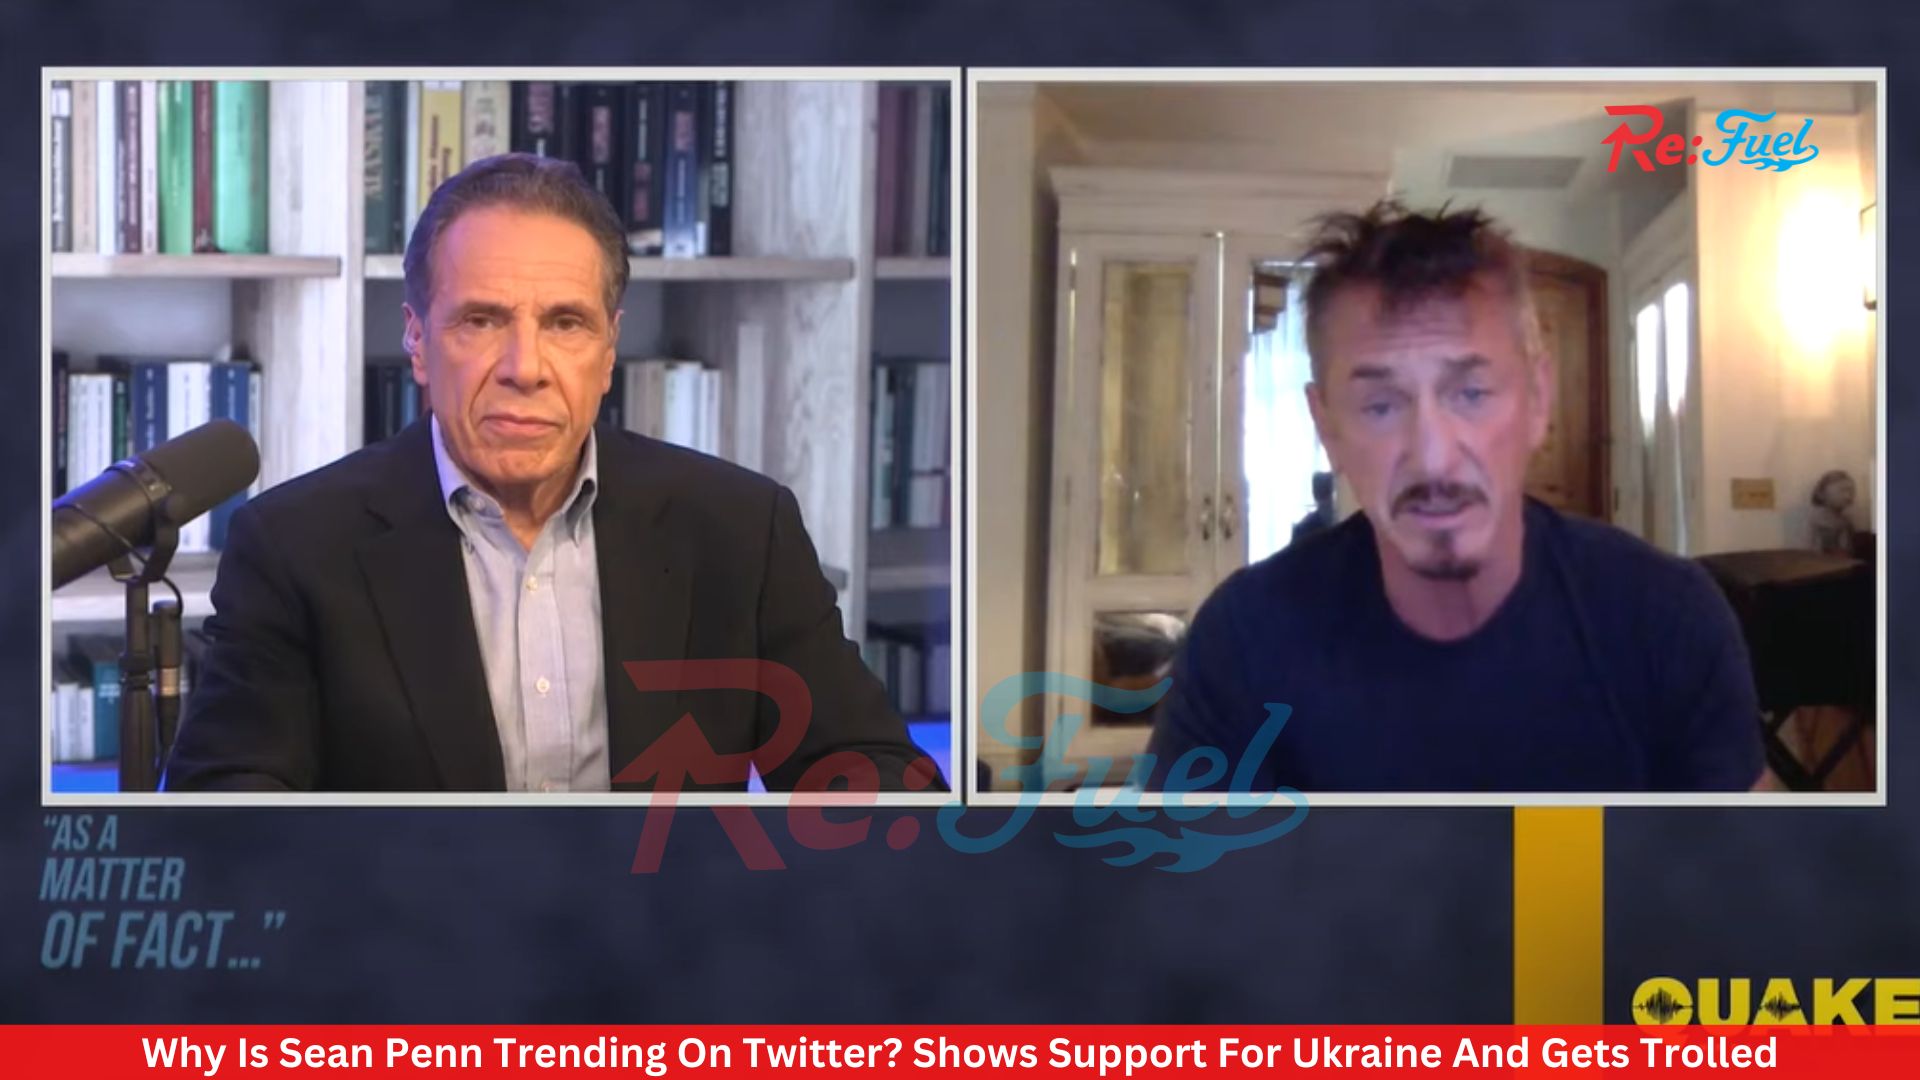 Why Is Sean Penn Trending On Twitter? Shows Support For Ukraine And Gets Trolled